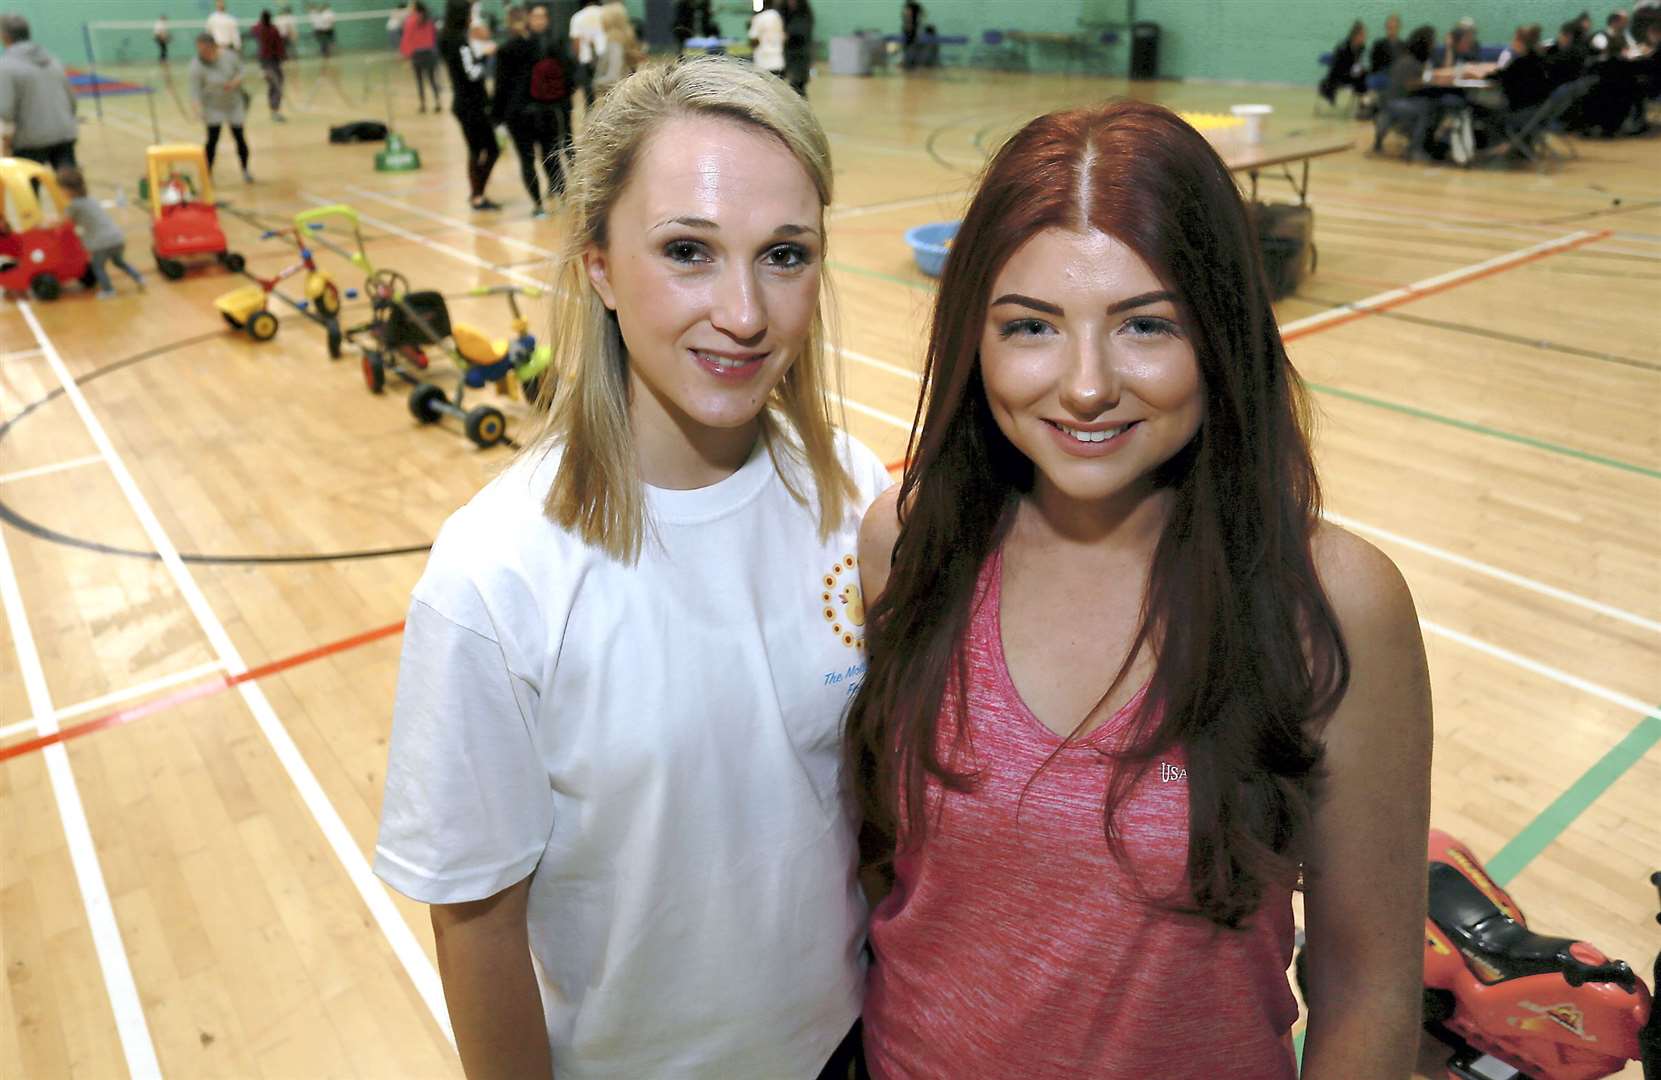 Event organiser Jennifer Hamer and Molly McLaren Foundation trustee Amy Lee at a sporty fundraising event in Medway Park, Gillingham